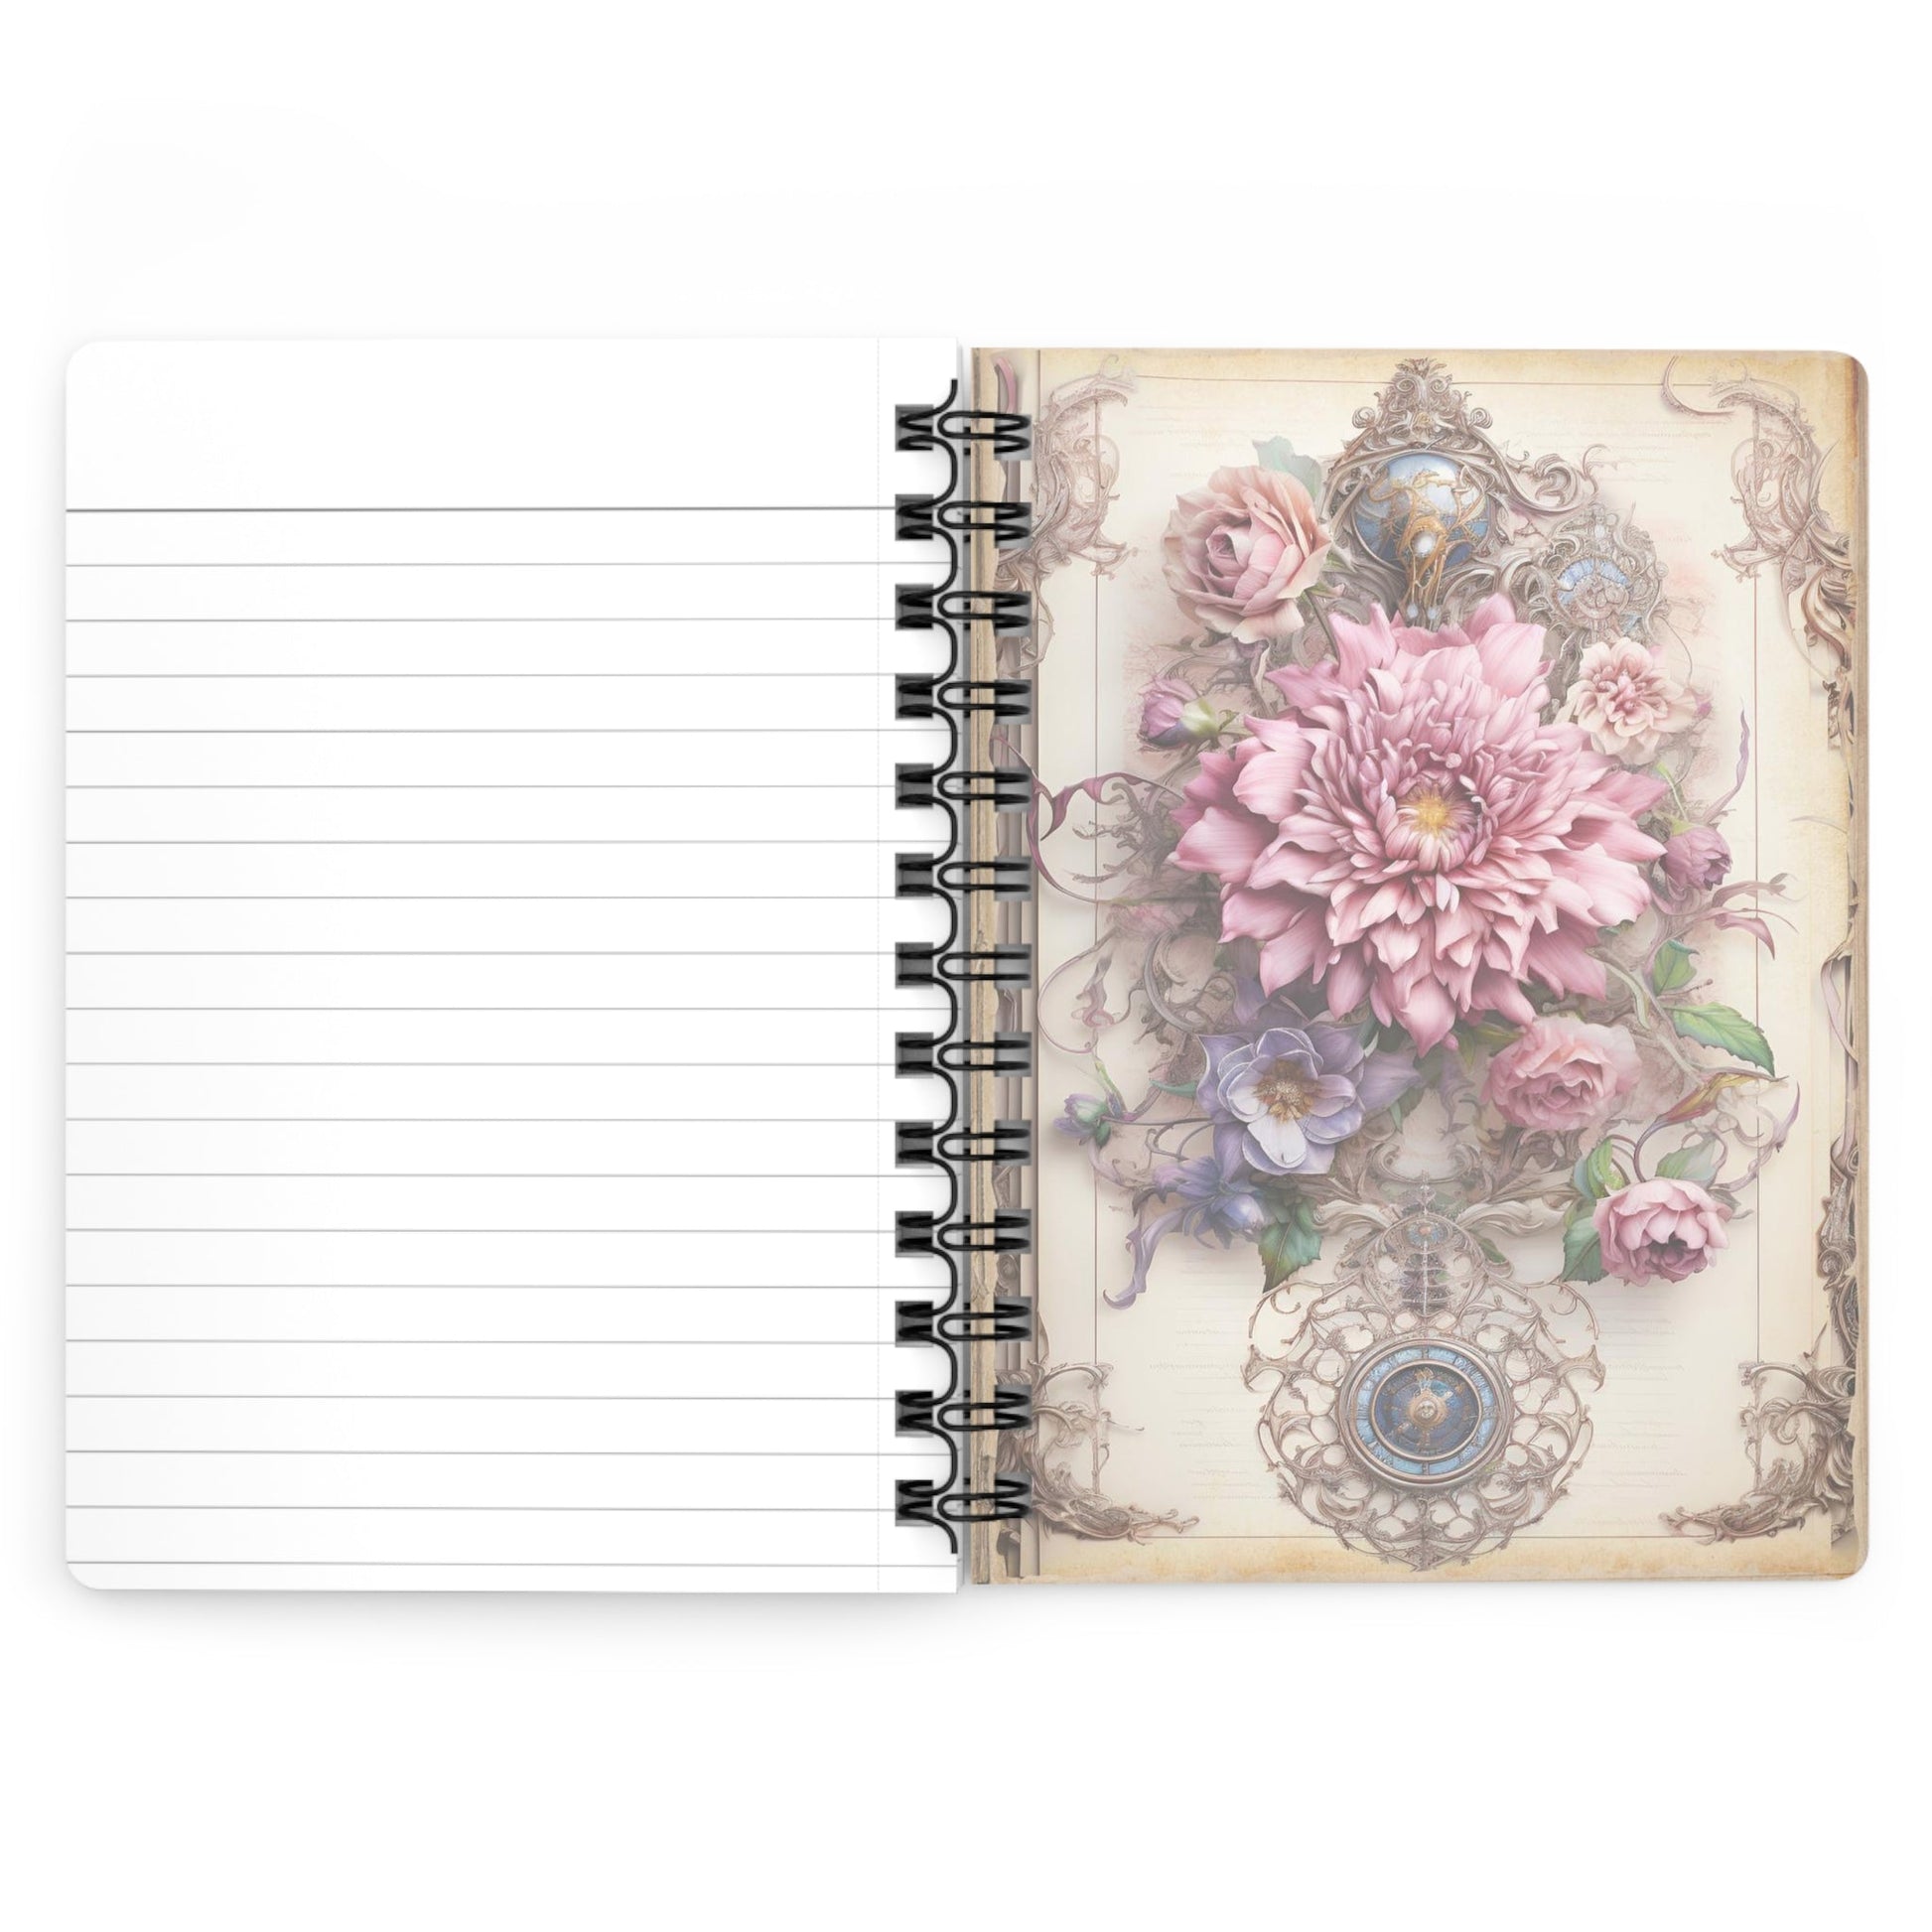 CrazyYetiClothing, CYC, Virgo - Floral Collection (Spiral Bound Journal), Paper products